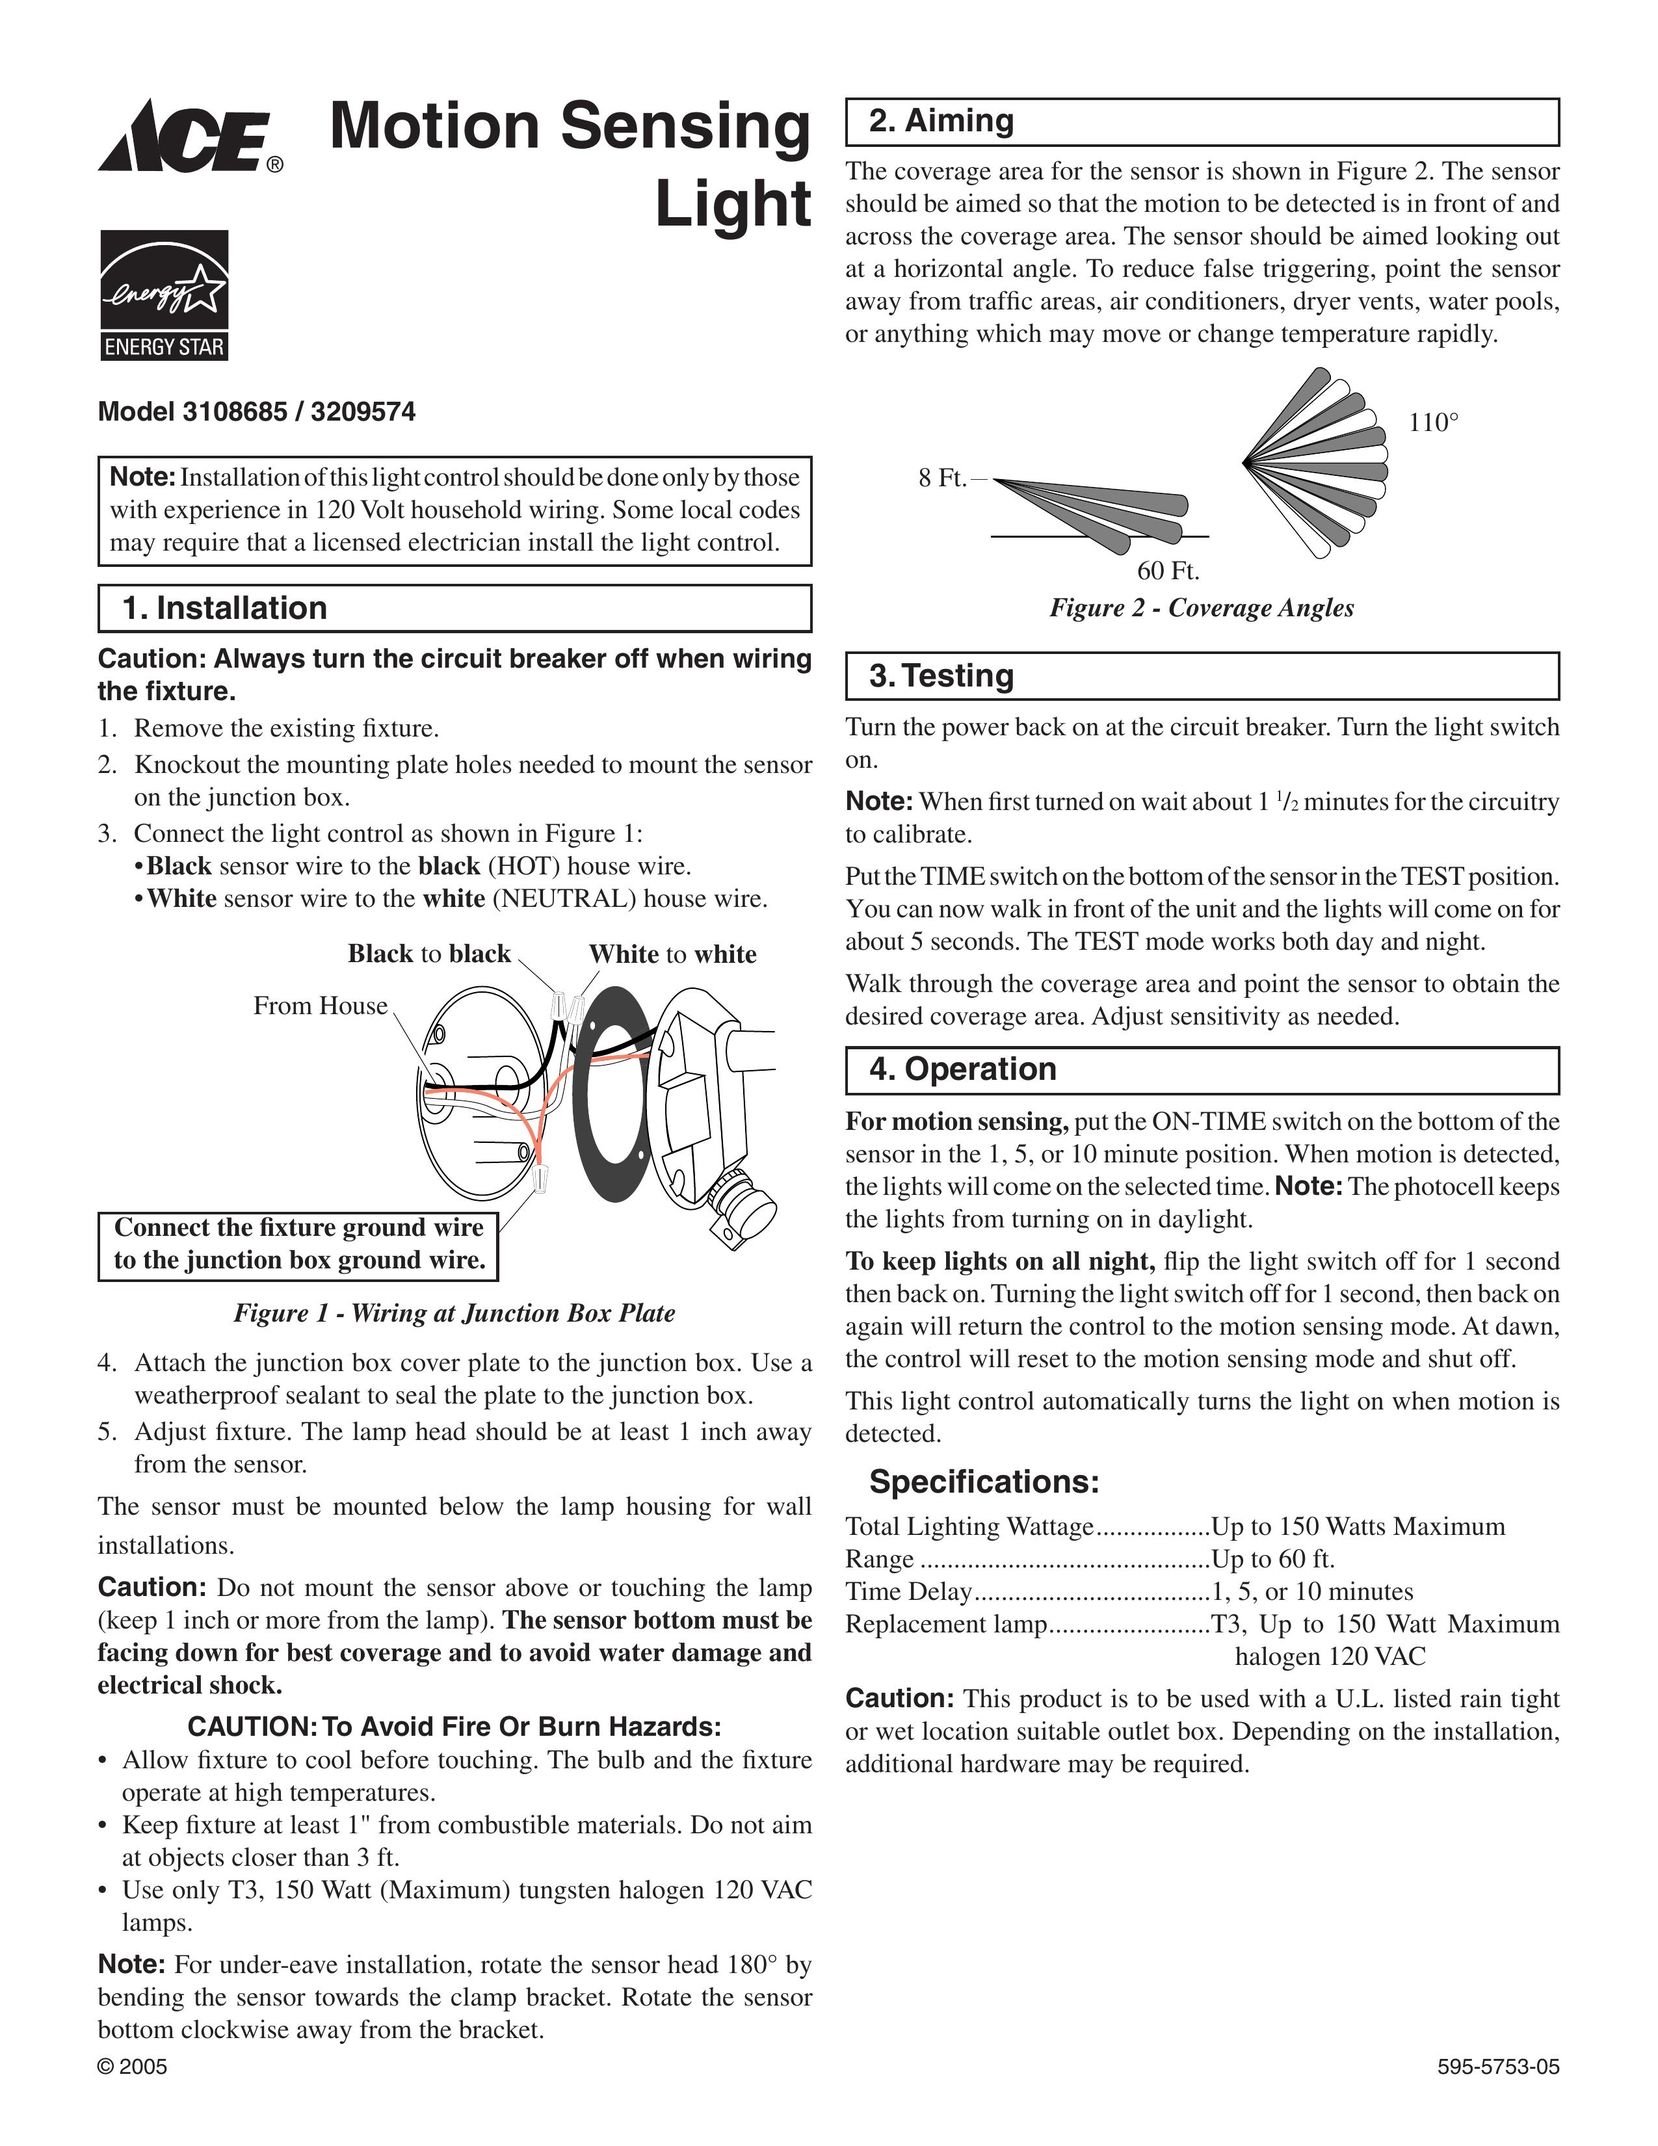 Ace Hardware 3108685 Home Security System User Manual